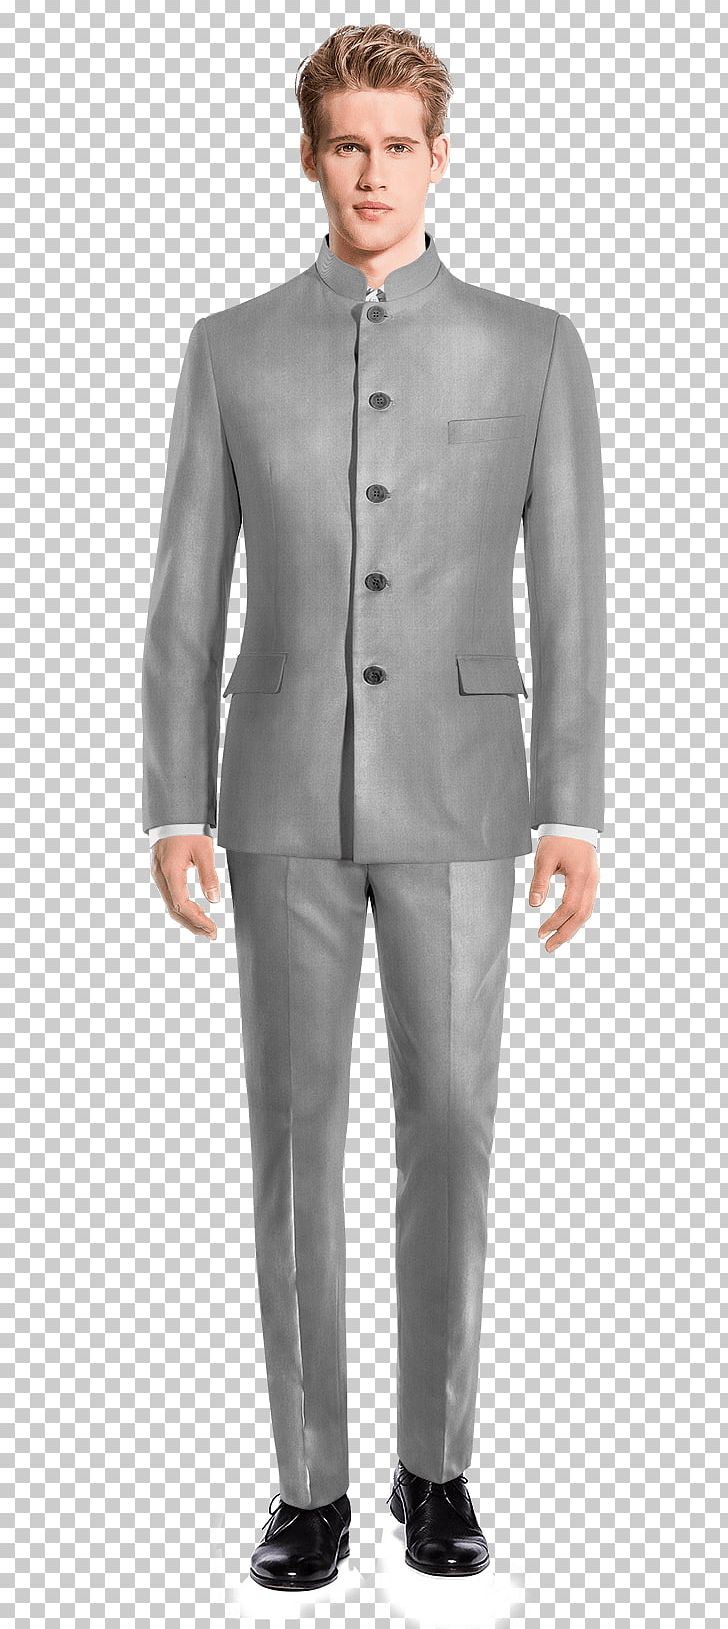 Mao Suit Double-breasted Pants Tuxedo PNG, Clipart, Blazer, Clothing, Coat, Costume, Doublebreasted Free PNG Download